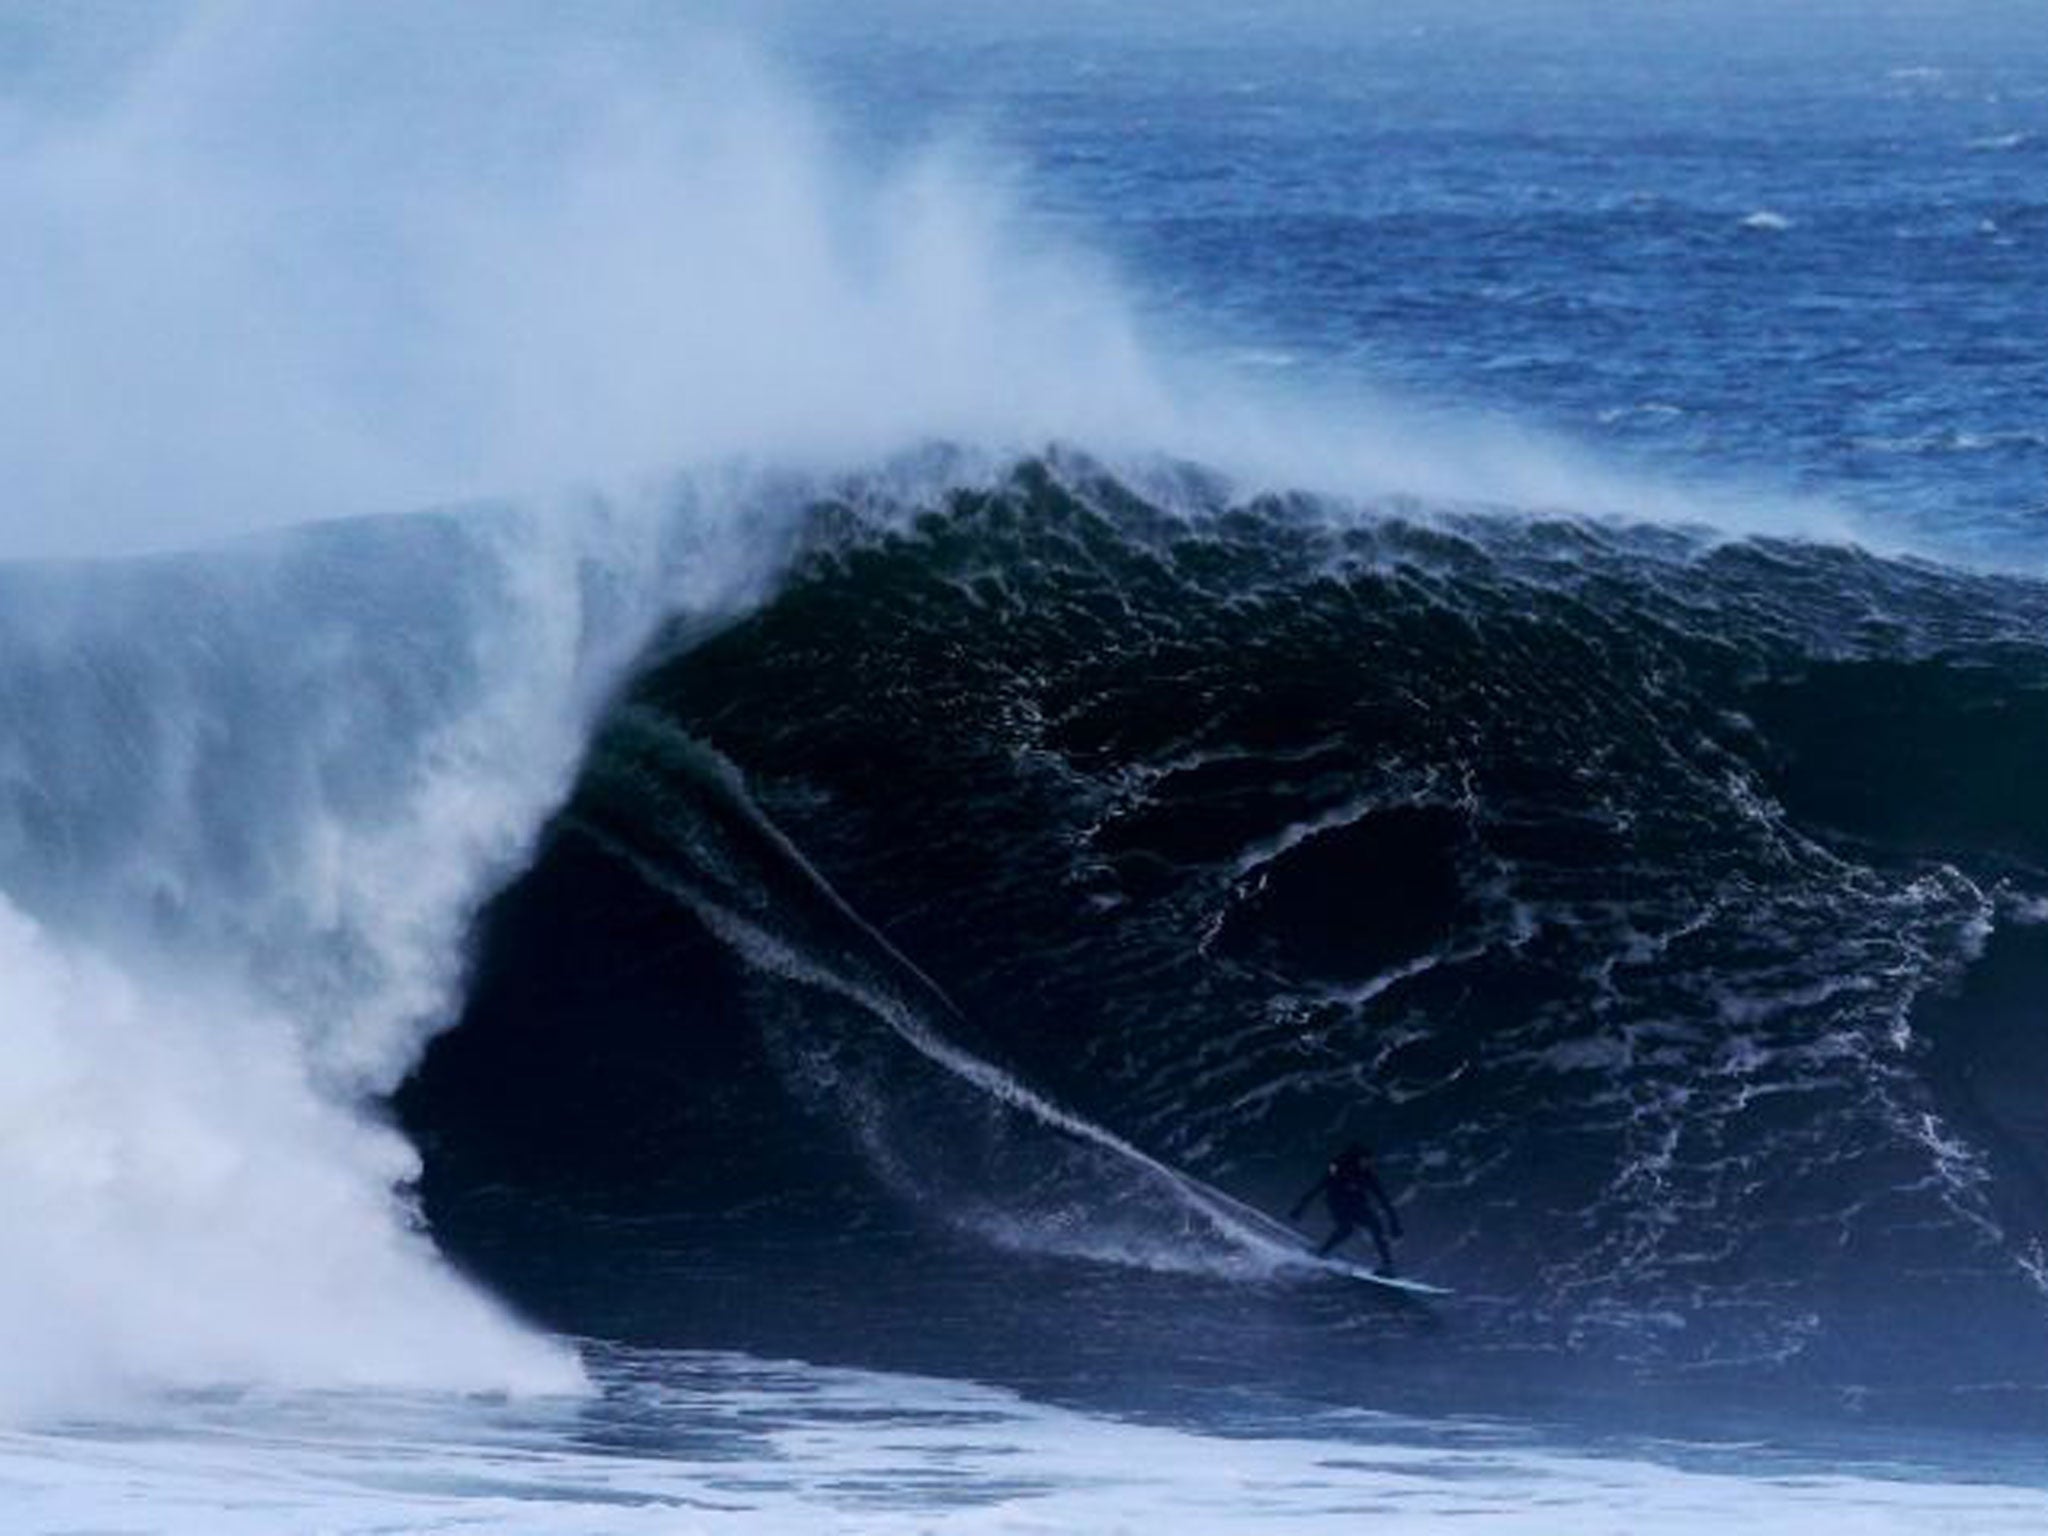 A surfer off the coast of Mullaghmore, County Sligo yesterday (Brian Lawless/PA)